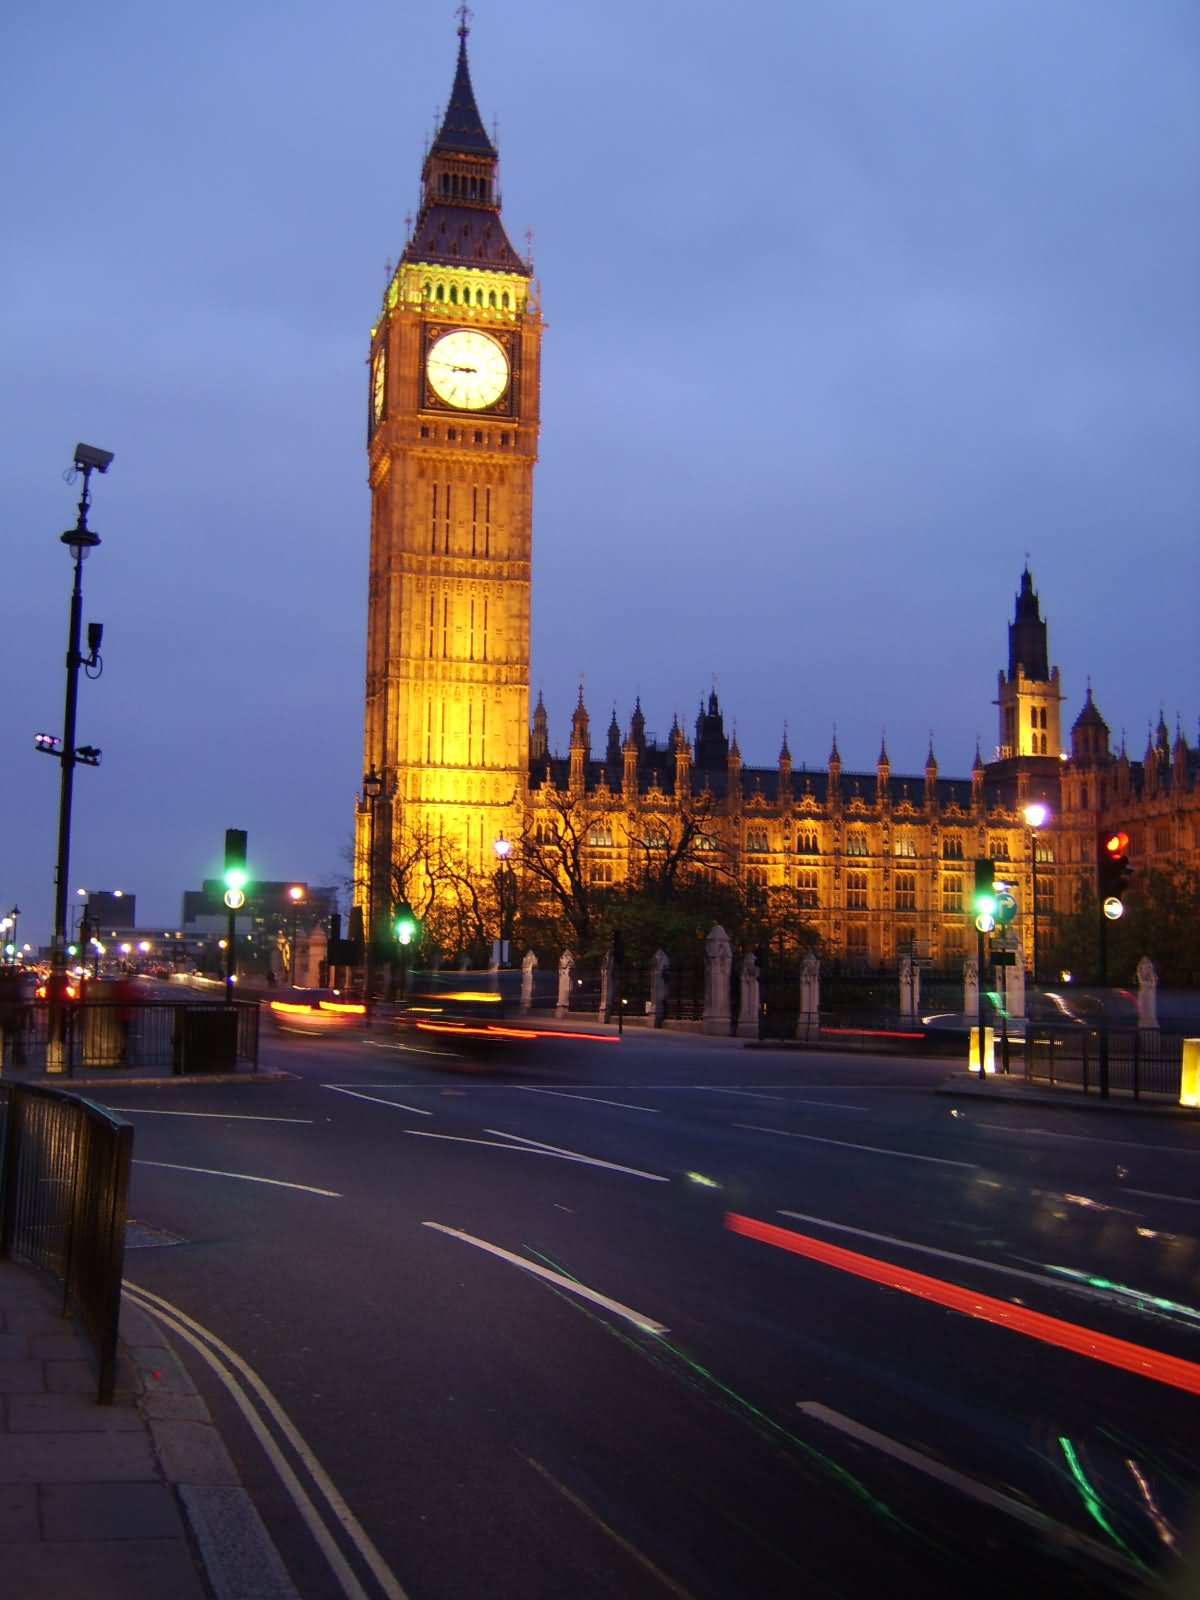 Beautiful Picture Of Big Ben At Night